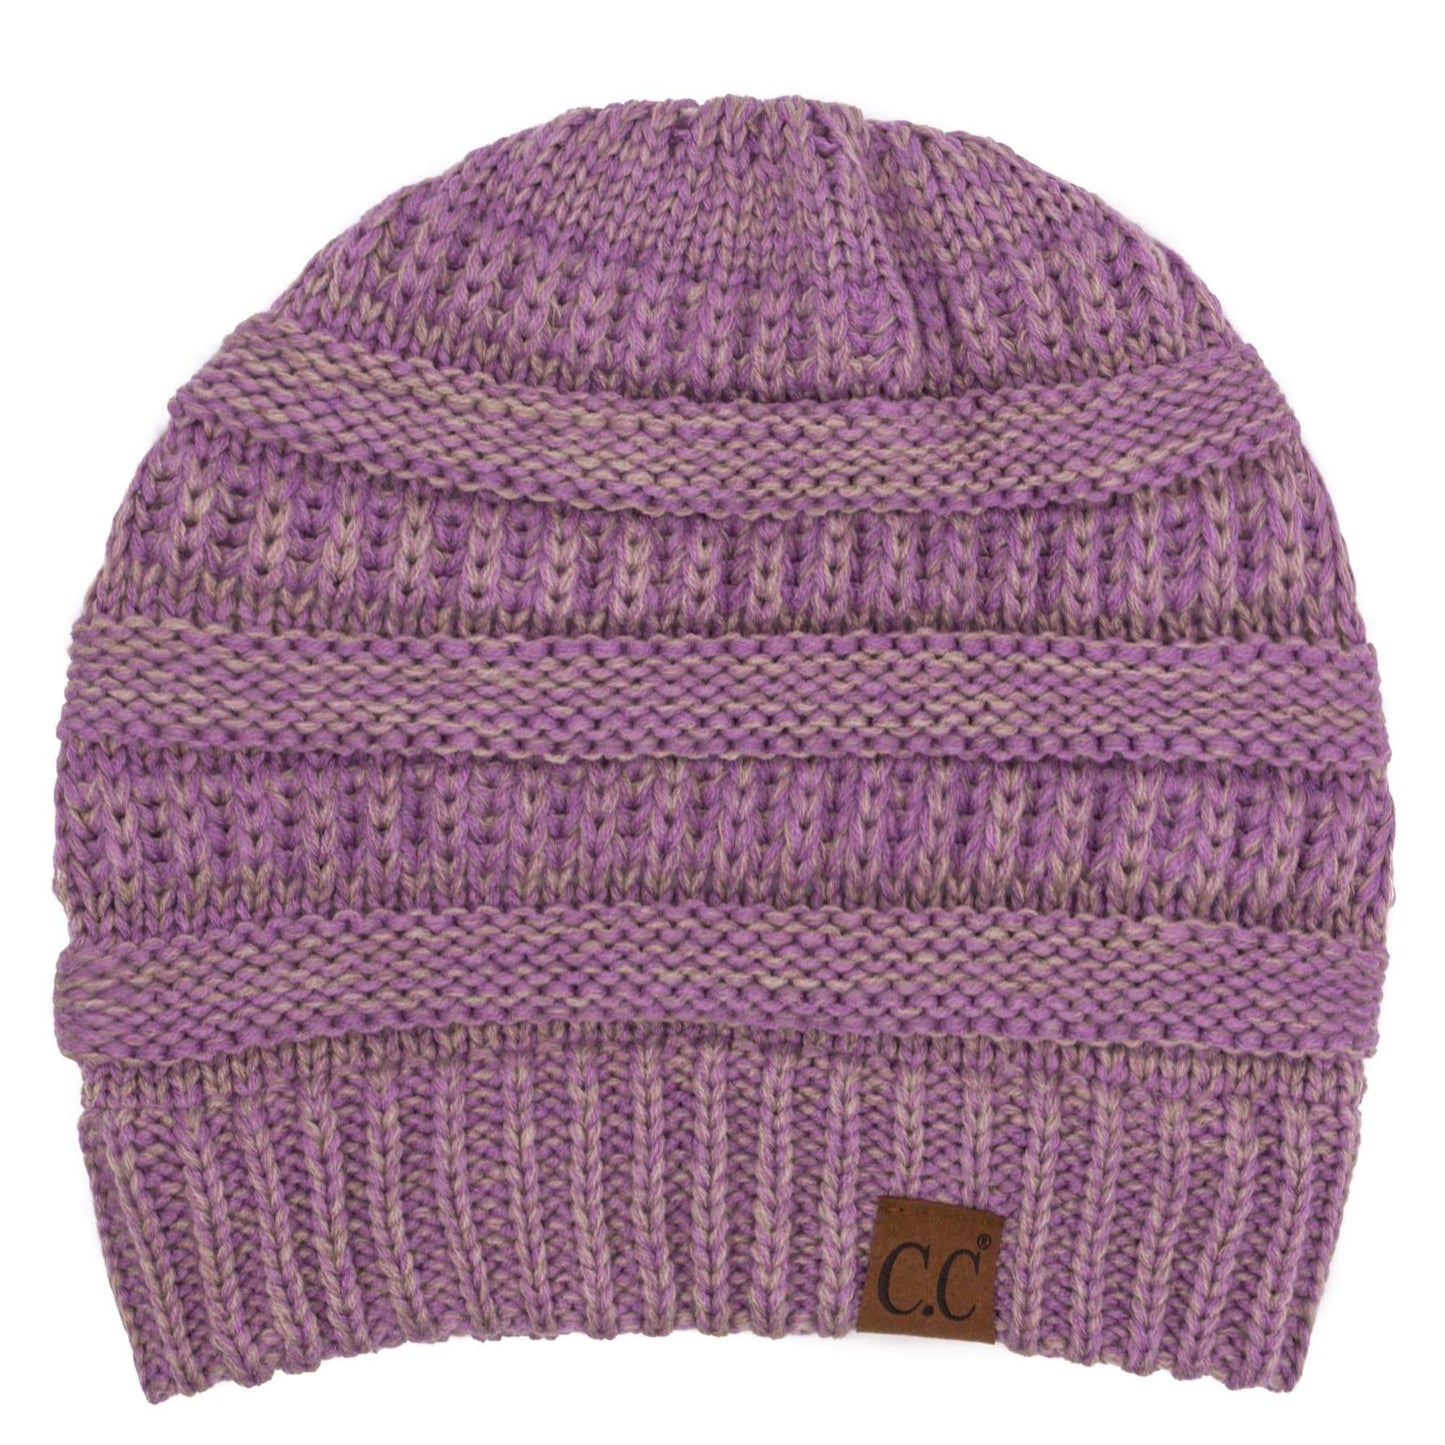 C.C Apparel Lilac/Dk Beige C.C Trendy Warm Chunky Soft Stretch Two-Toned Cable Knit Beanie Skully